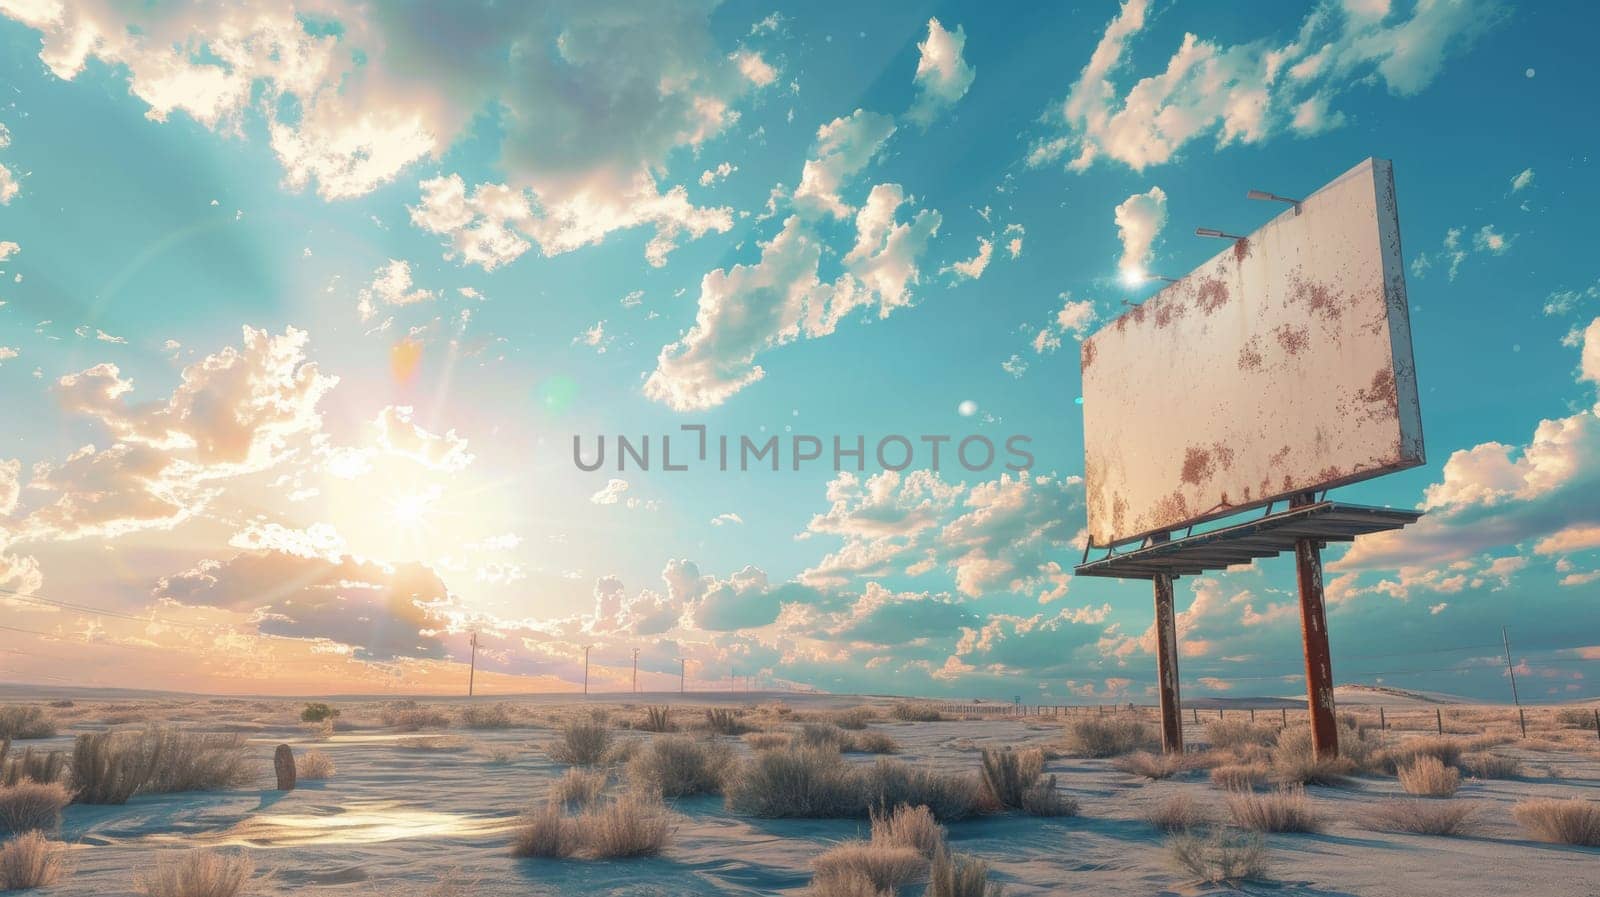 A large billboard in the middle of a desert with clouds, AI by starush